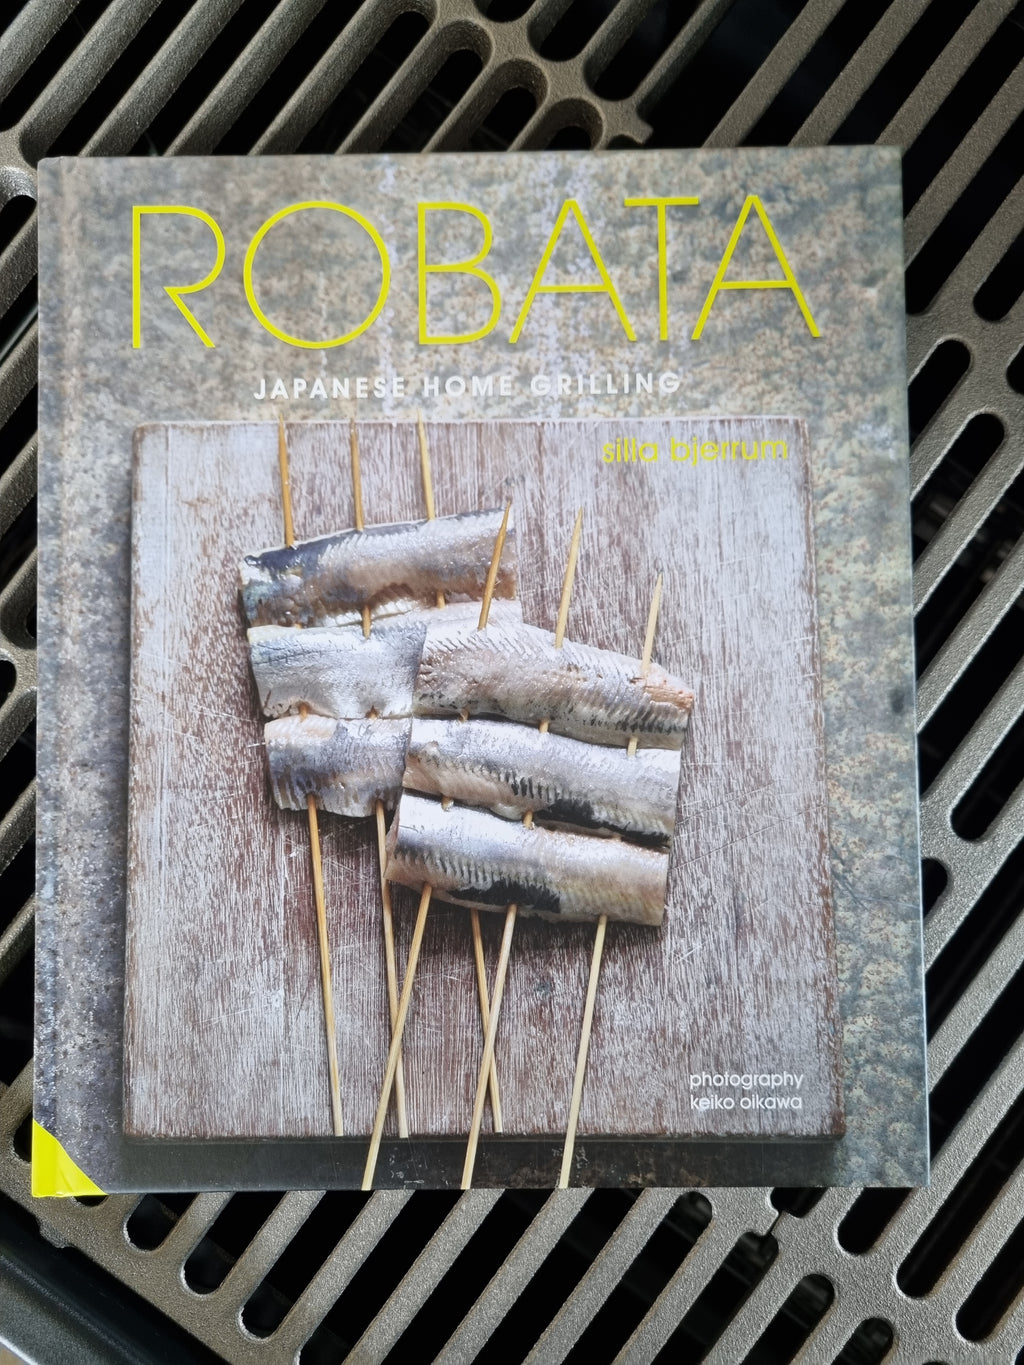 Robata Japanese Home Grilling Cook Book